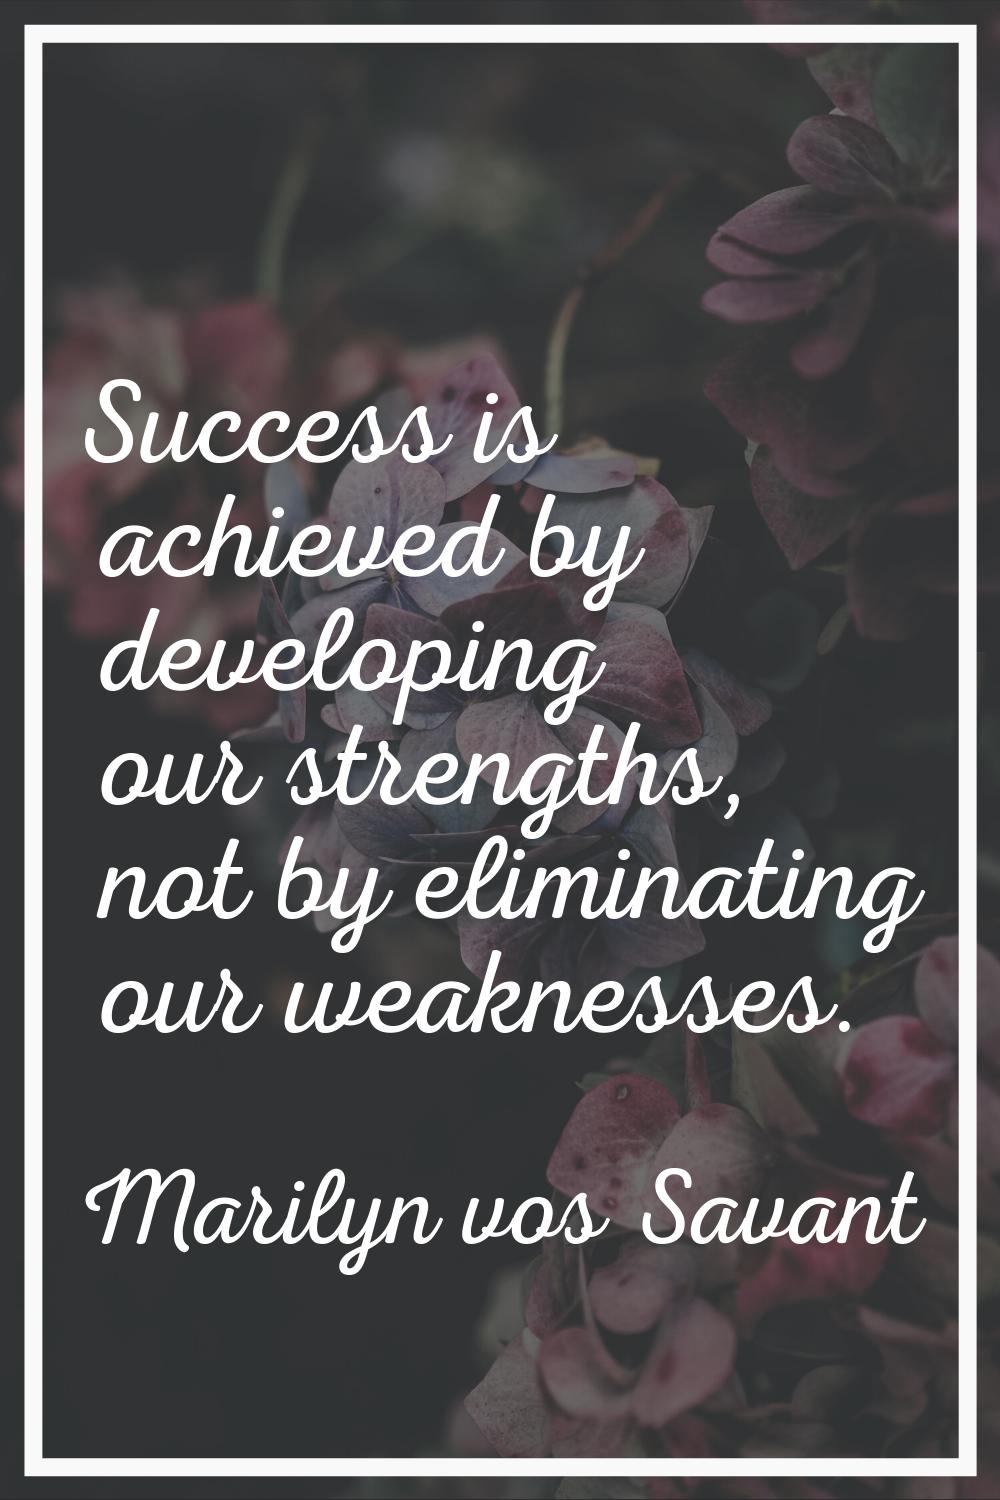 Success is achieved by developing our strengths, not by eliminating our weaknesses.